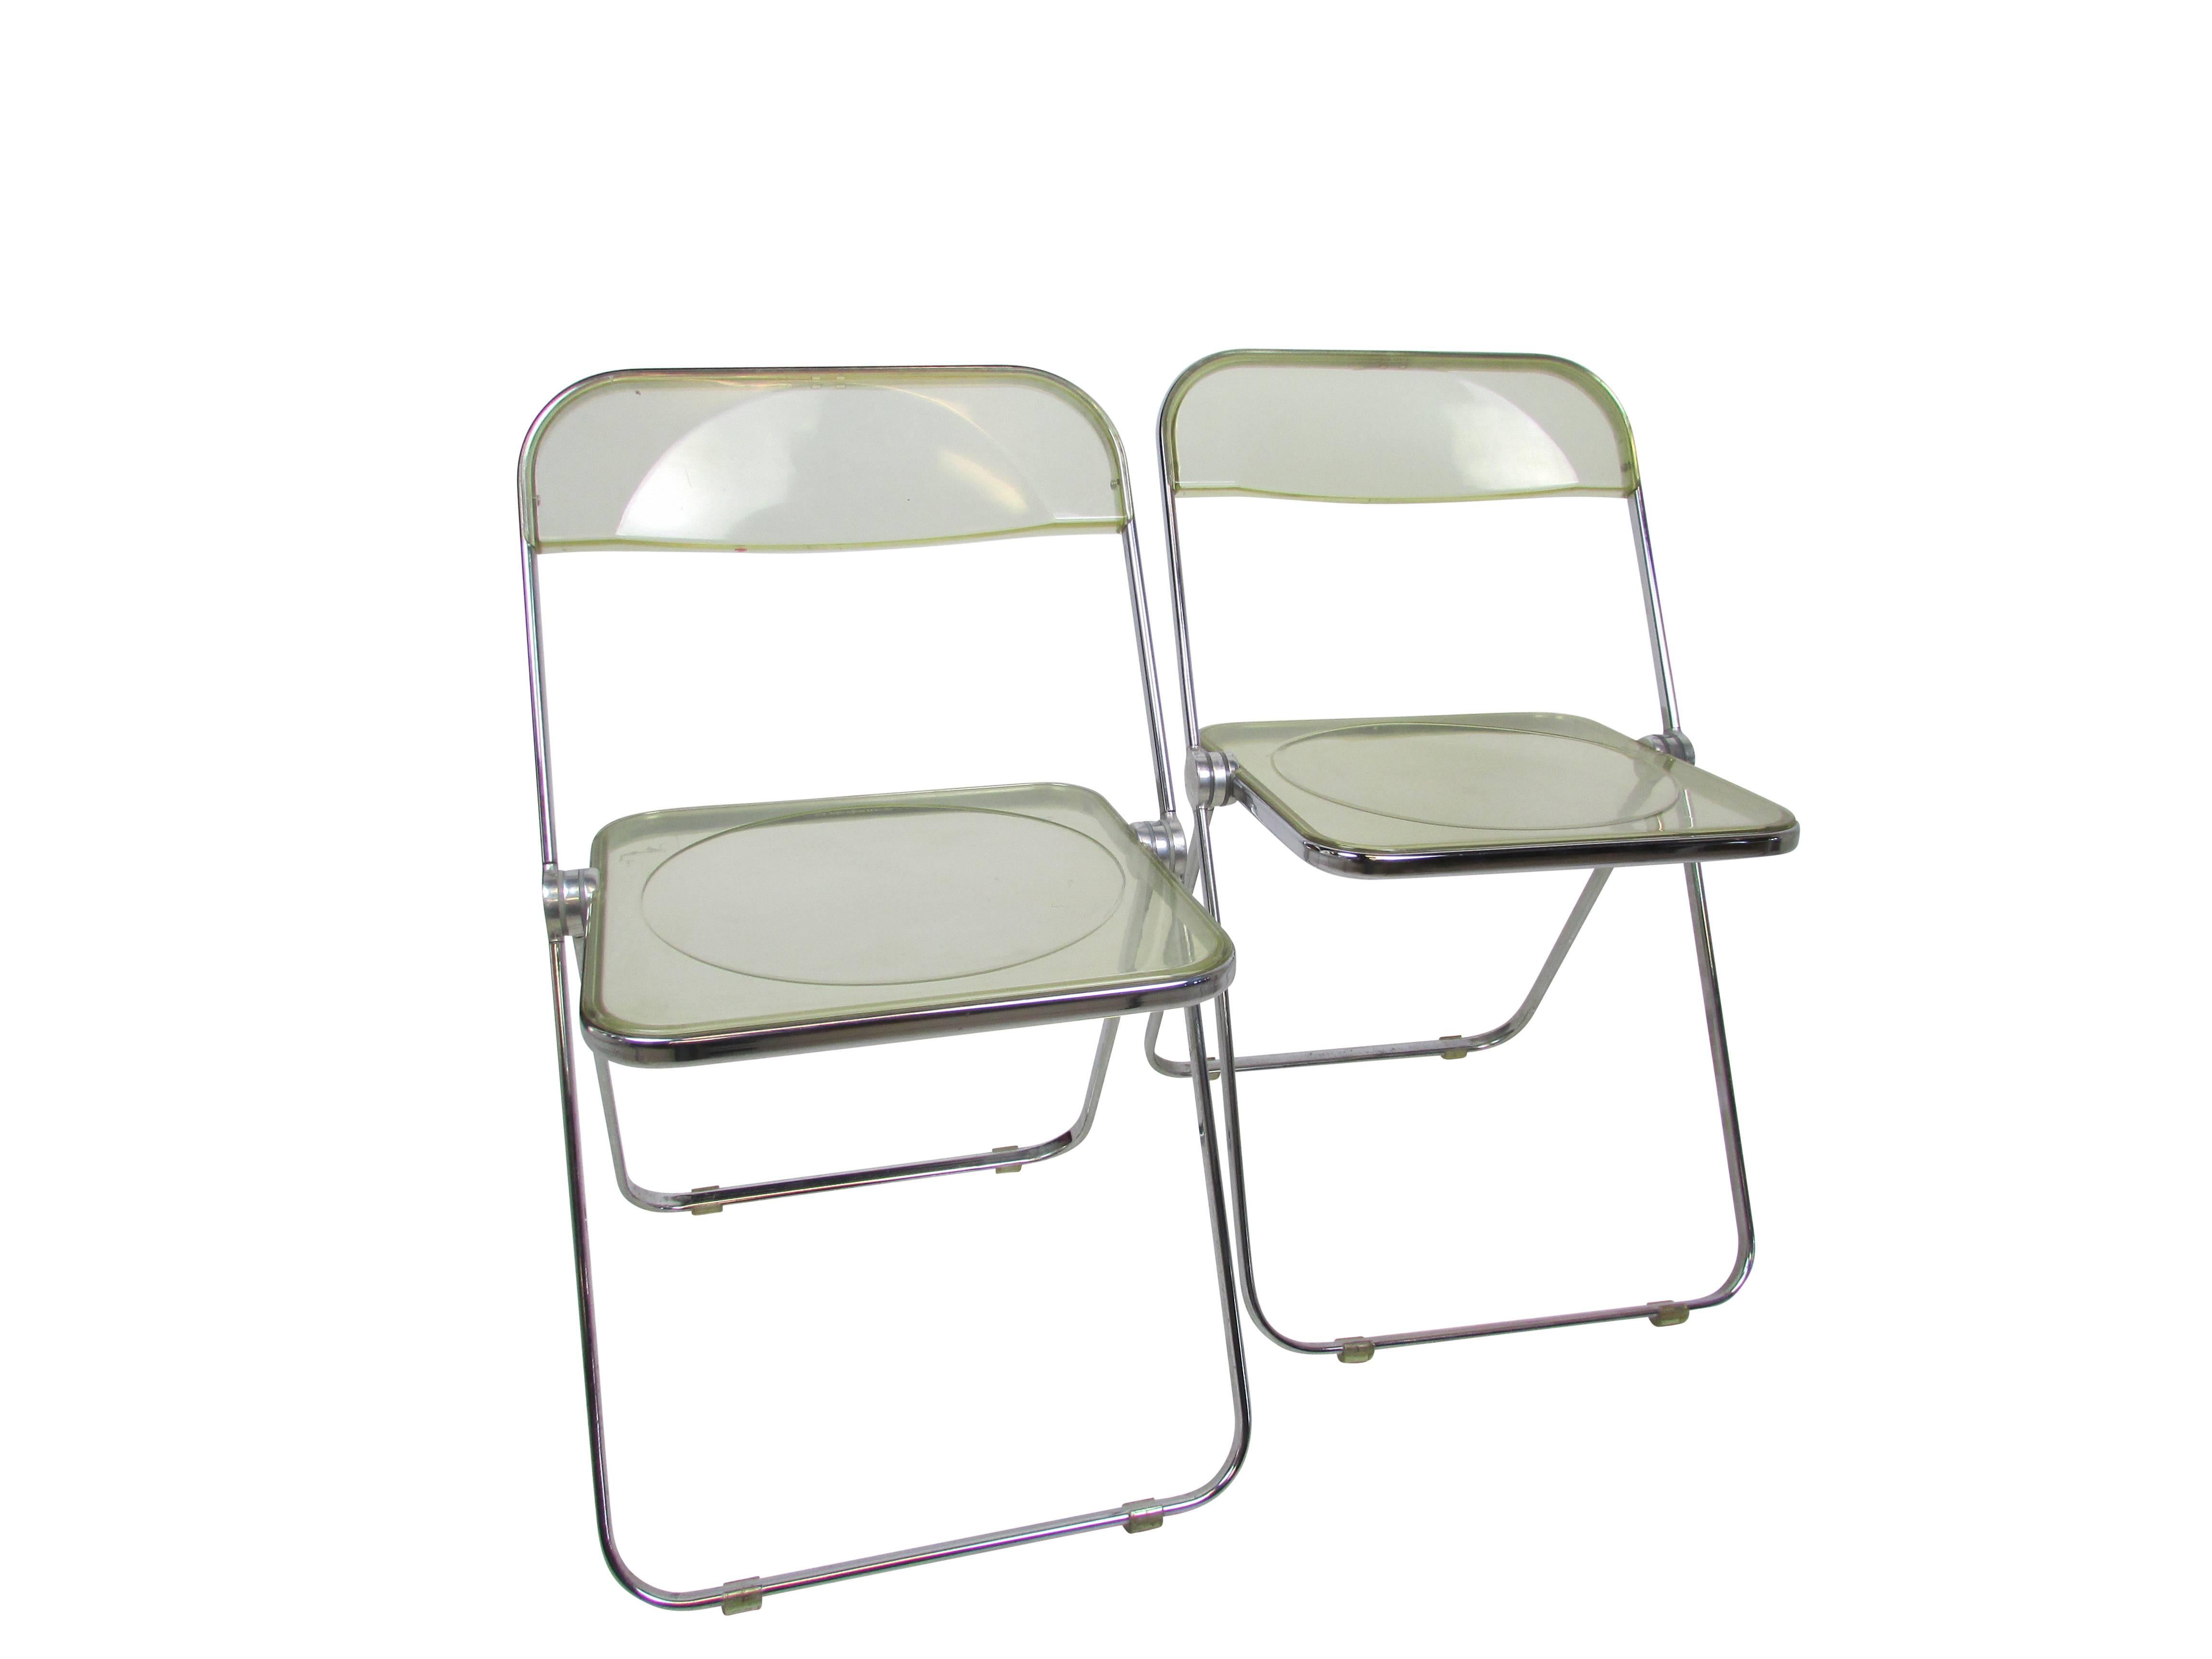 This is a pair of Midcentury Lucite acrylic ‘Plia’ folding chairs by Giancarlo Piretti for Castelli of Italy.